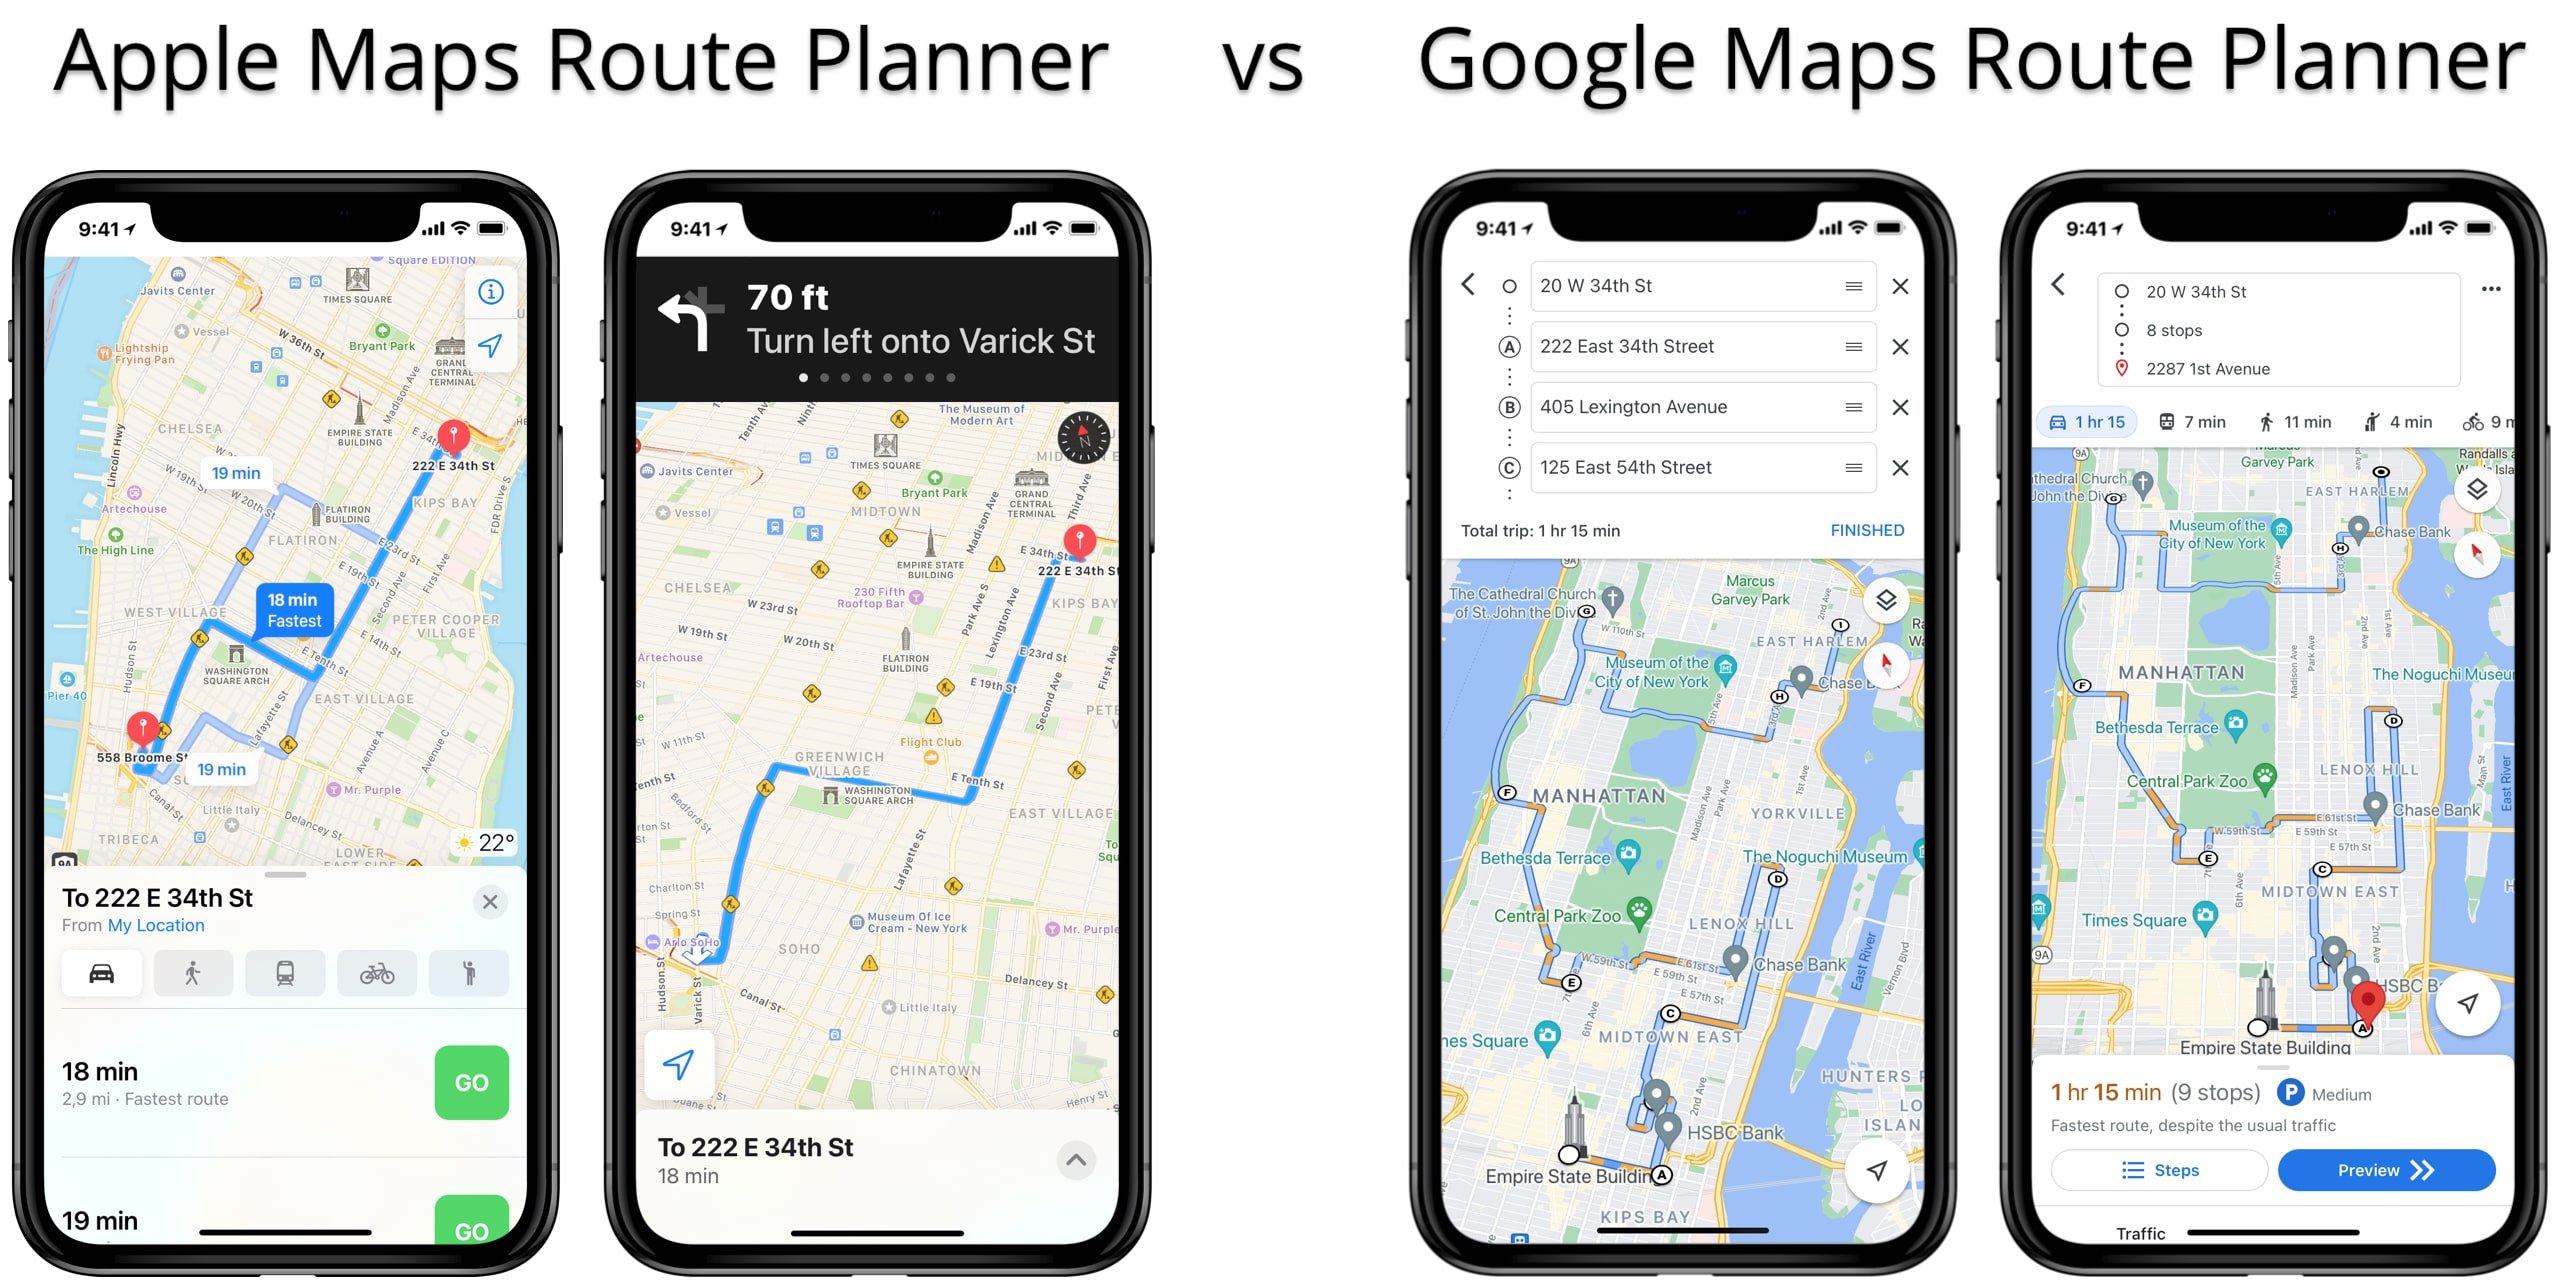 Apple Maps route planner vs Google Maps route planner app for route optimization and navigation.